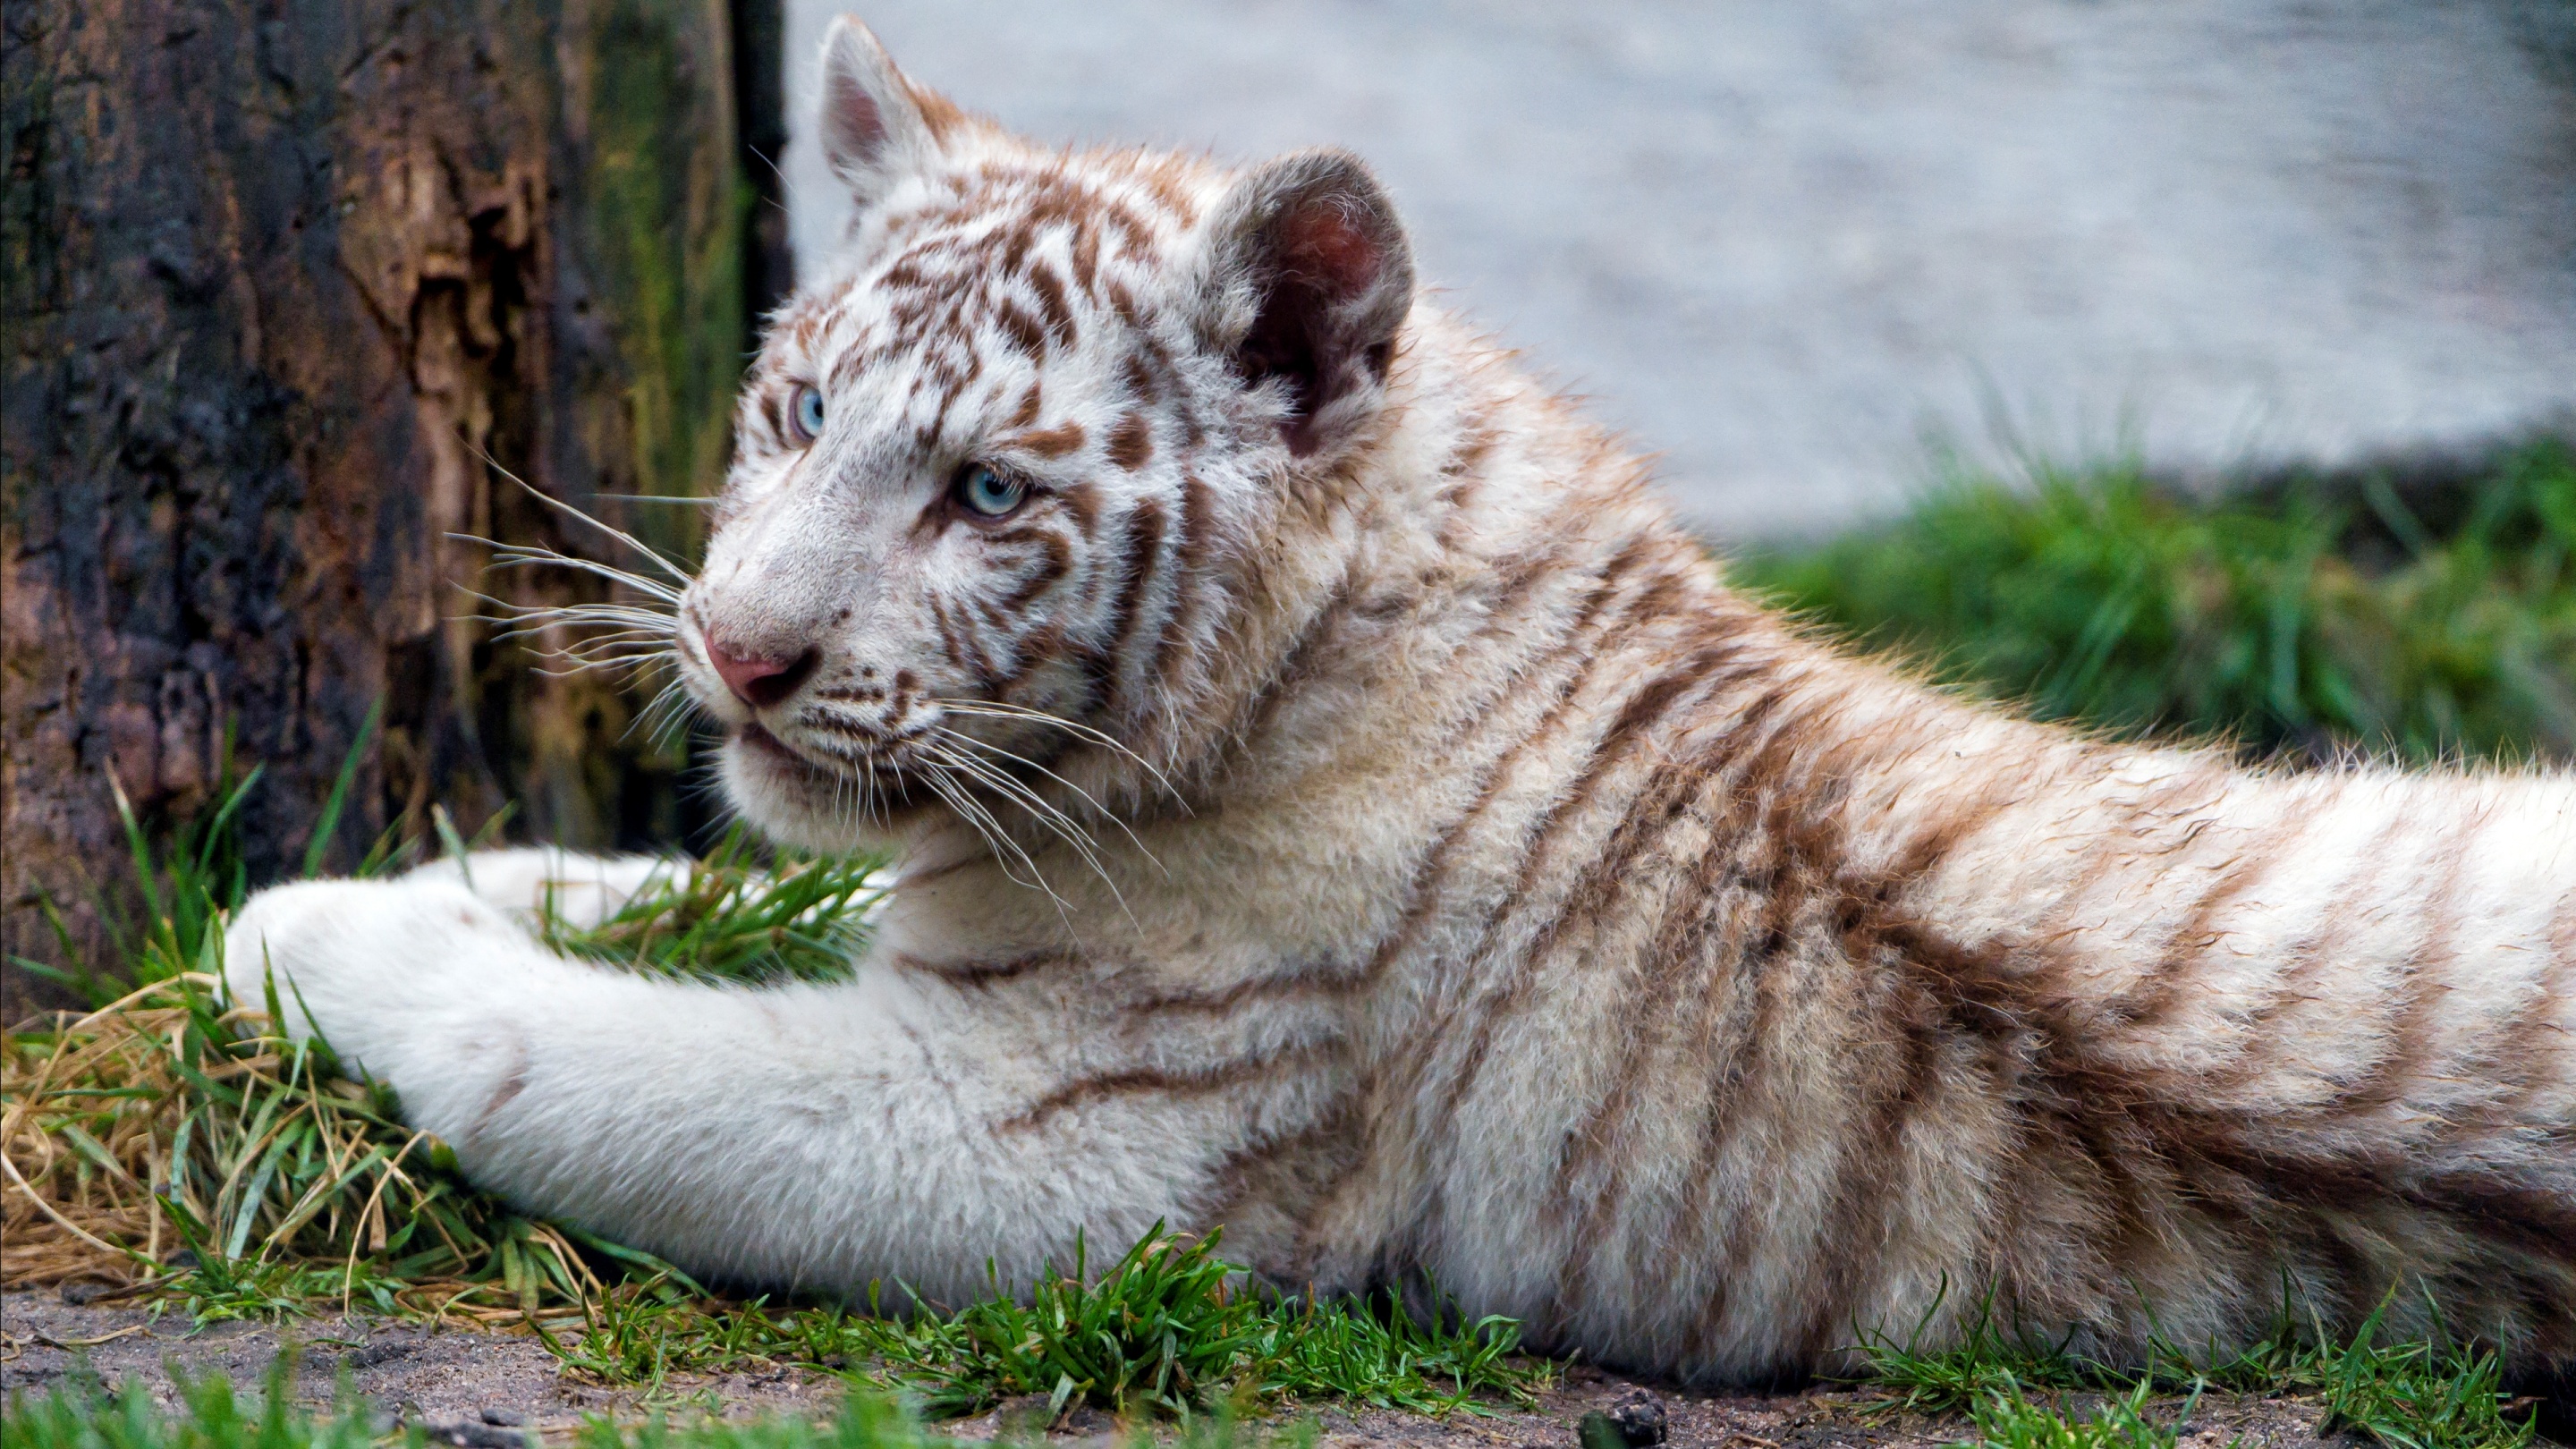 Chilling White Tiger Cub Wallpapers   2880x1620   1946805 2880x1620